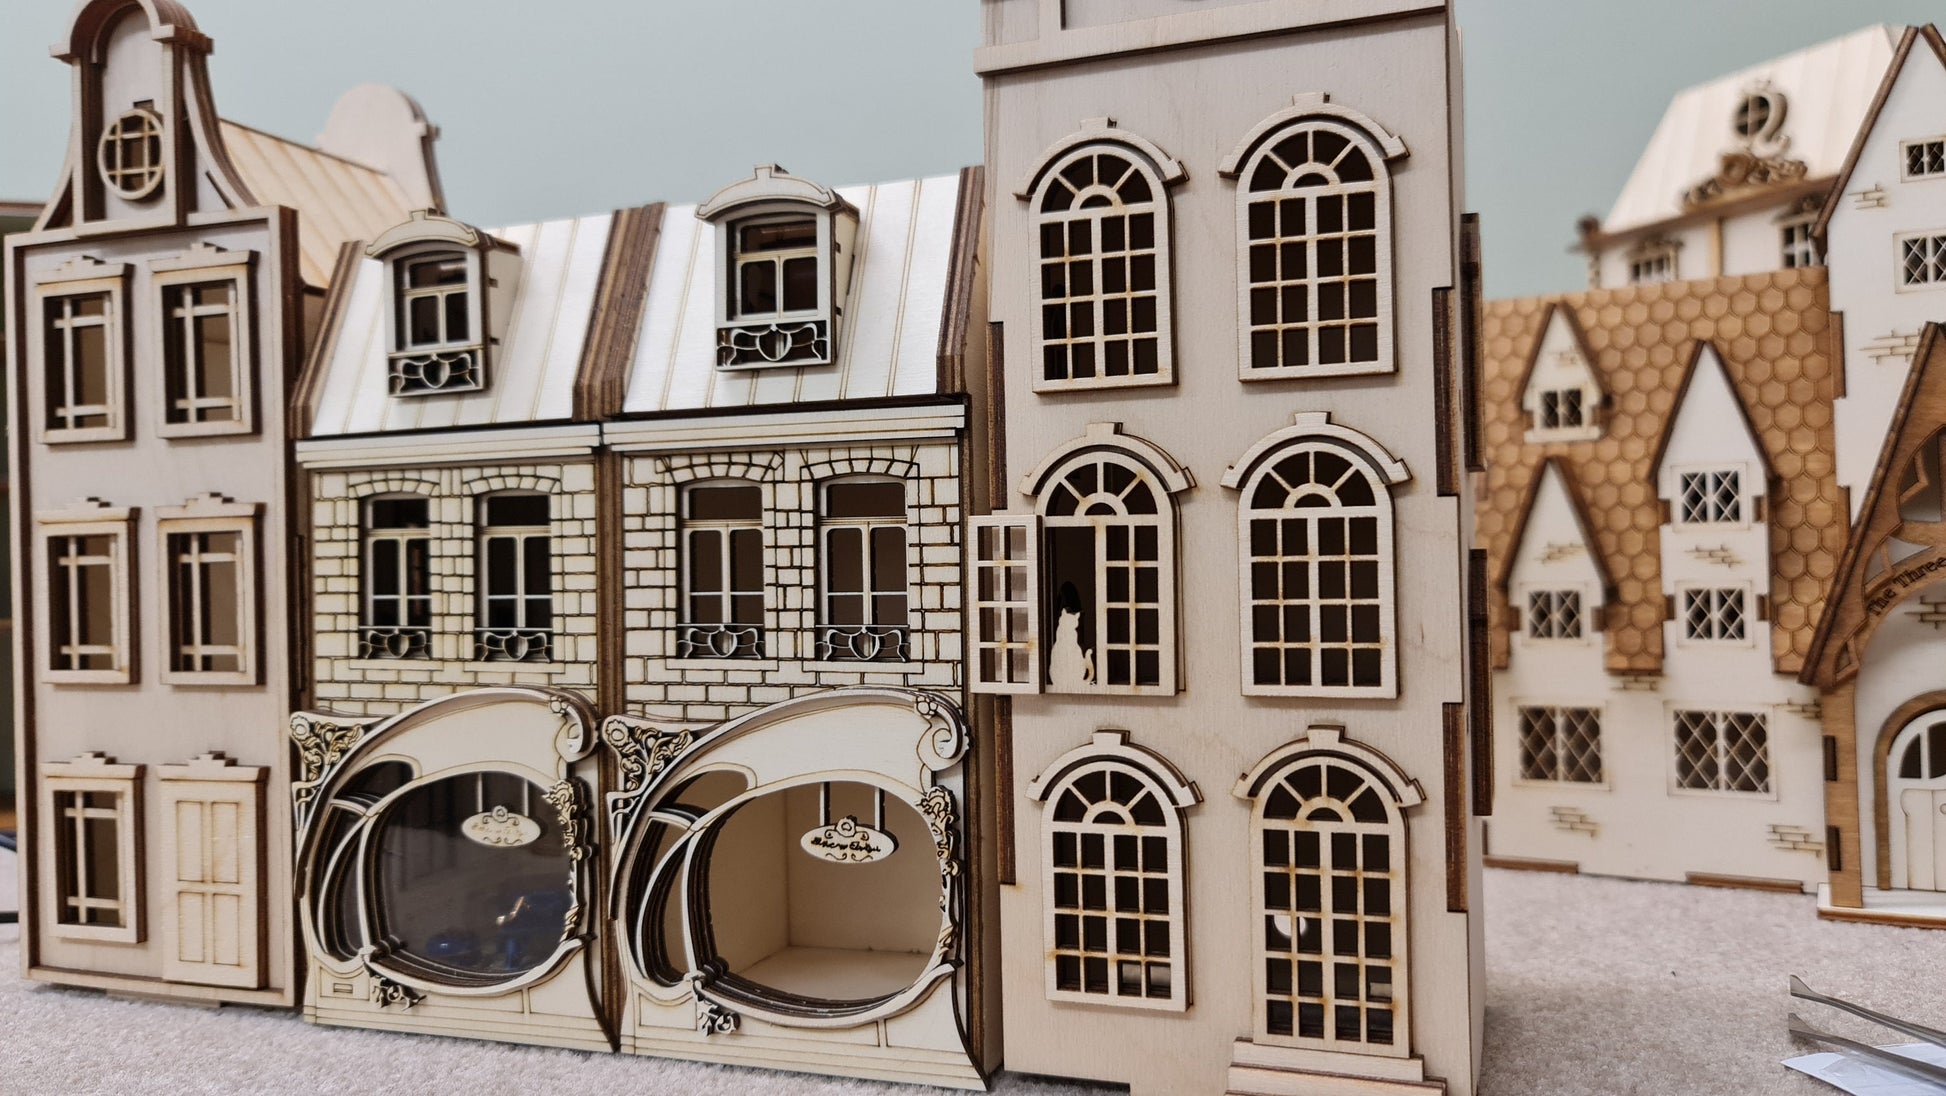 "The French Boutique", 1;48th scale